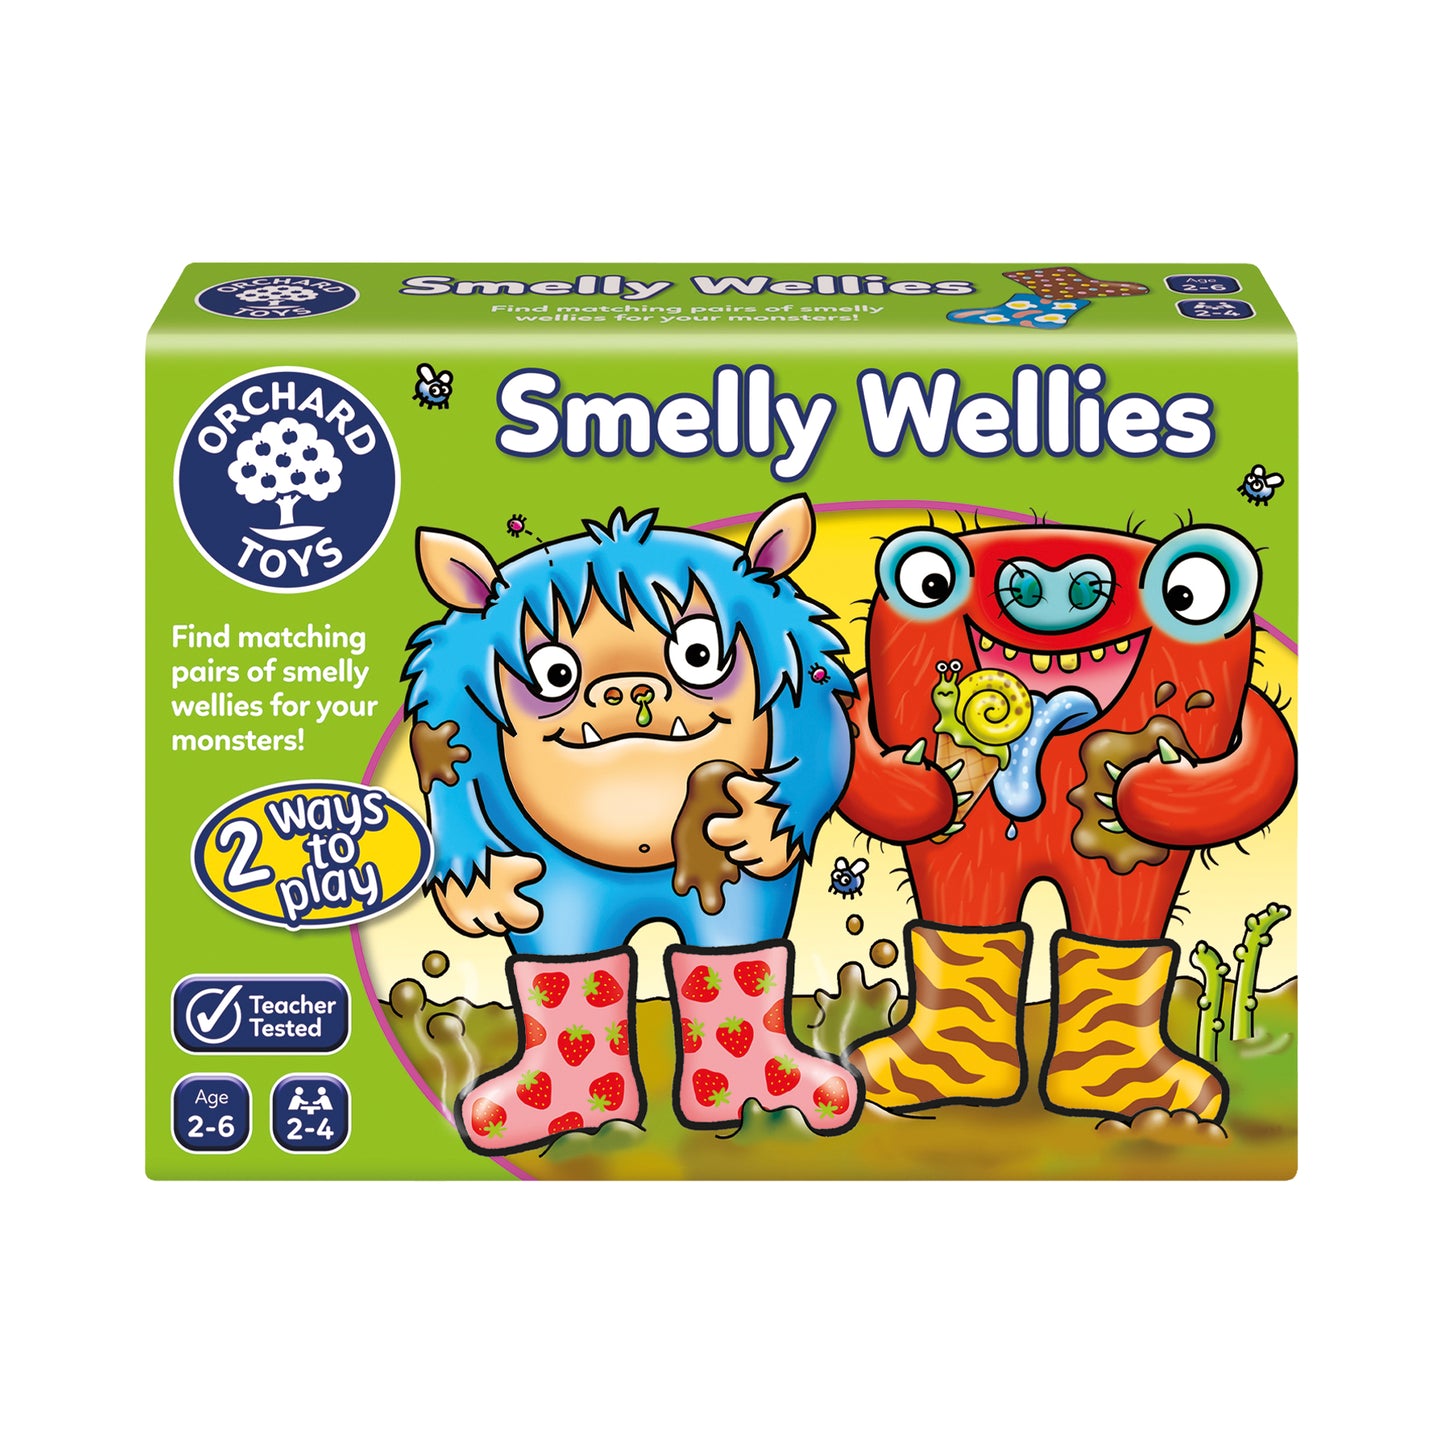 Orchard Toys Smelly Wellies Matching Game